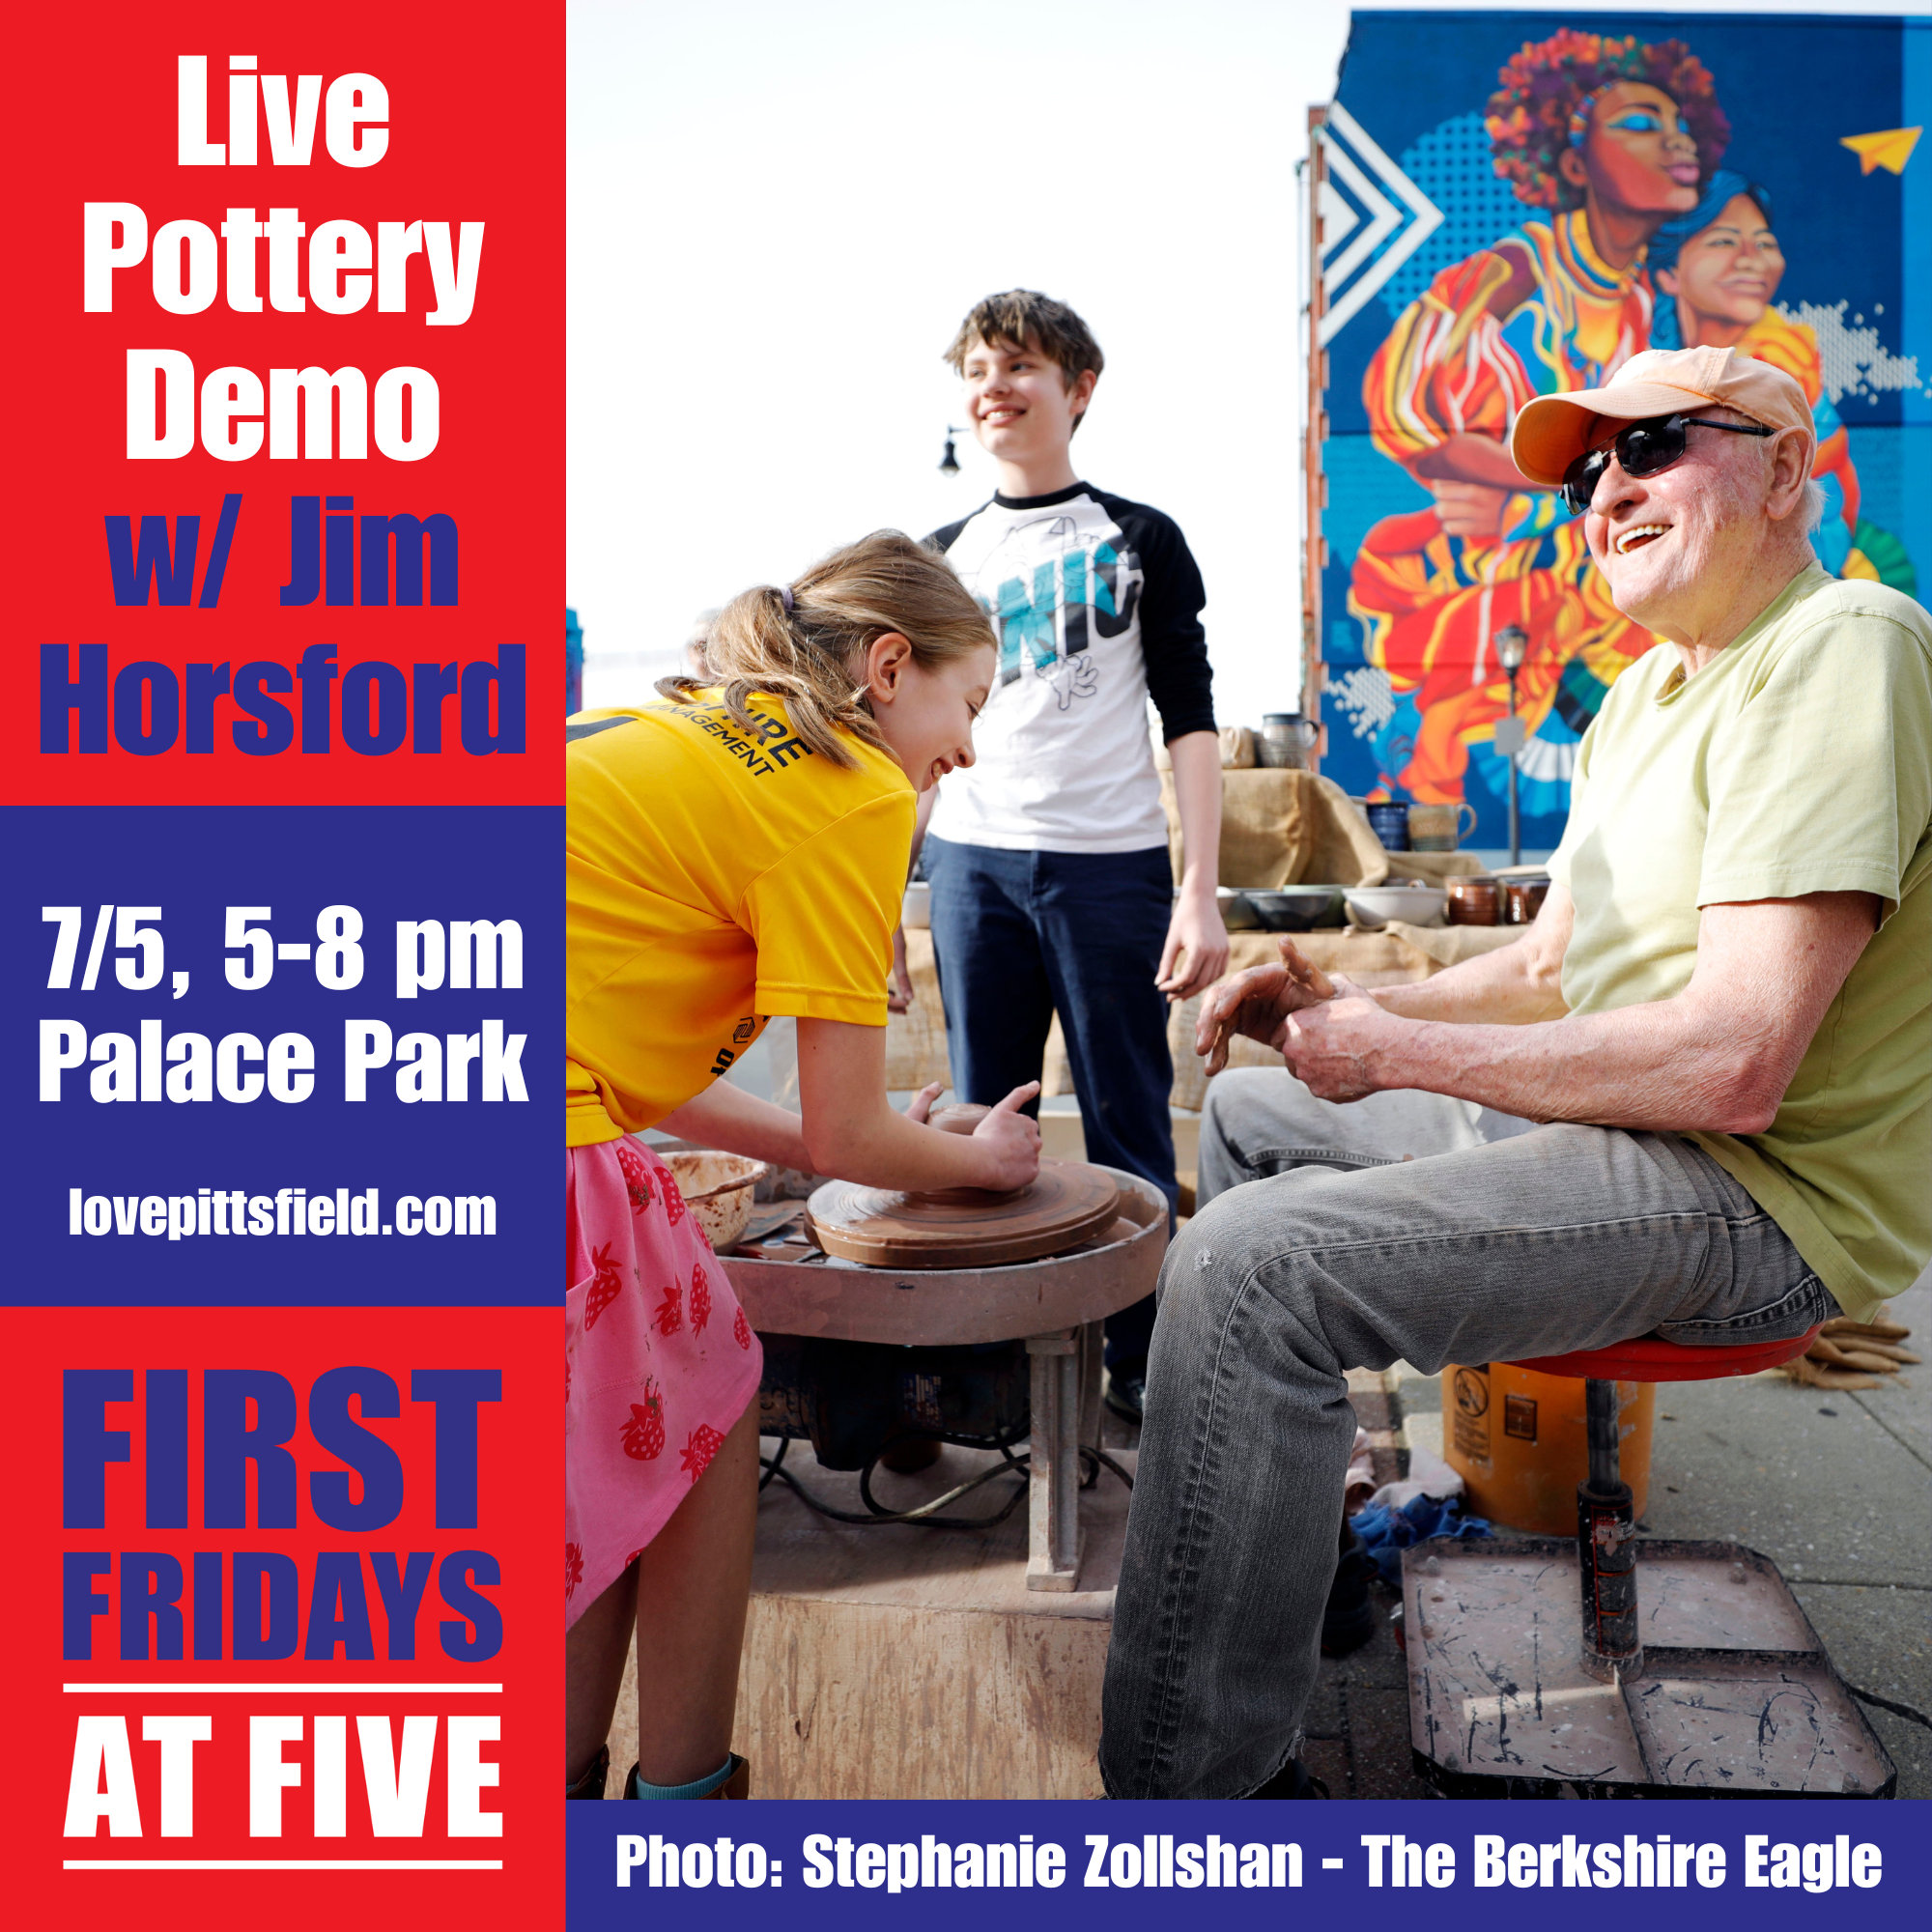 Live Pottery Demonstration with Jim Horsford